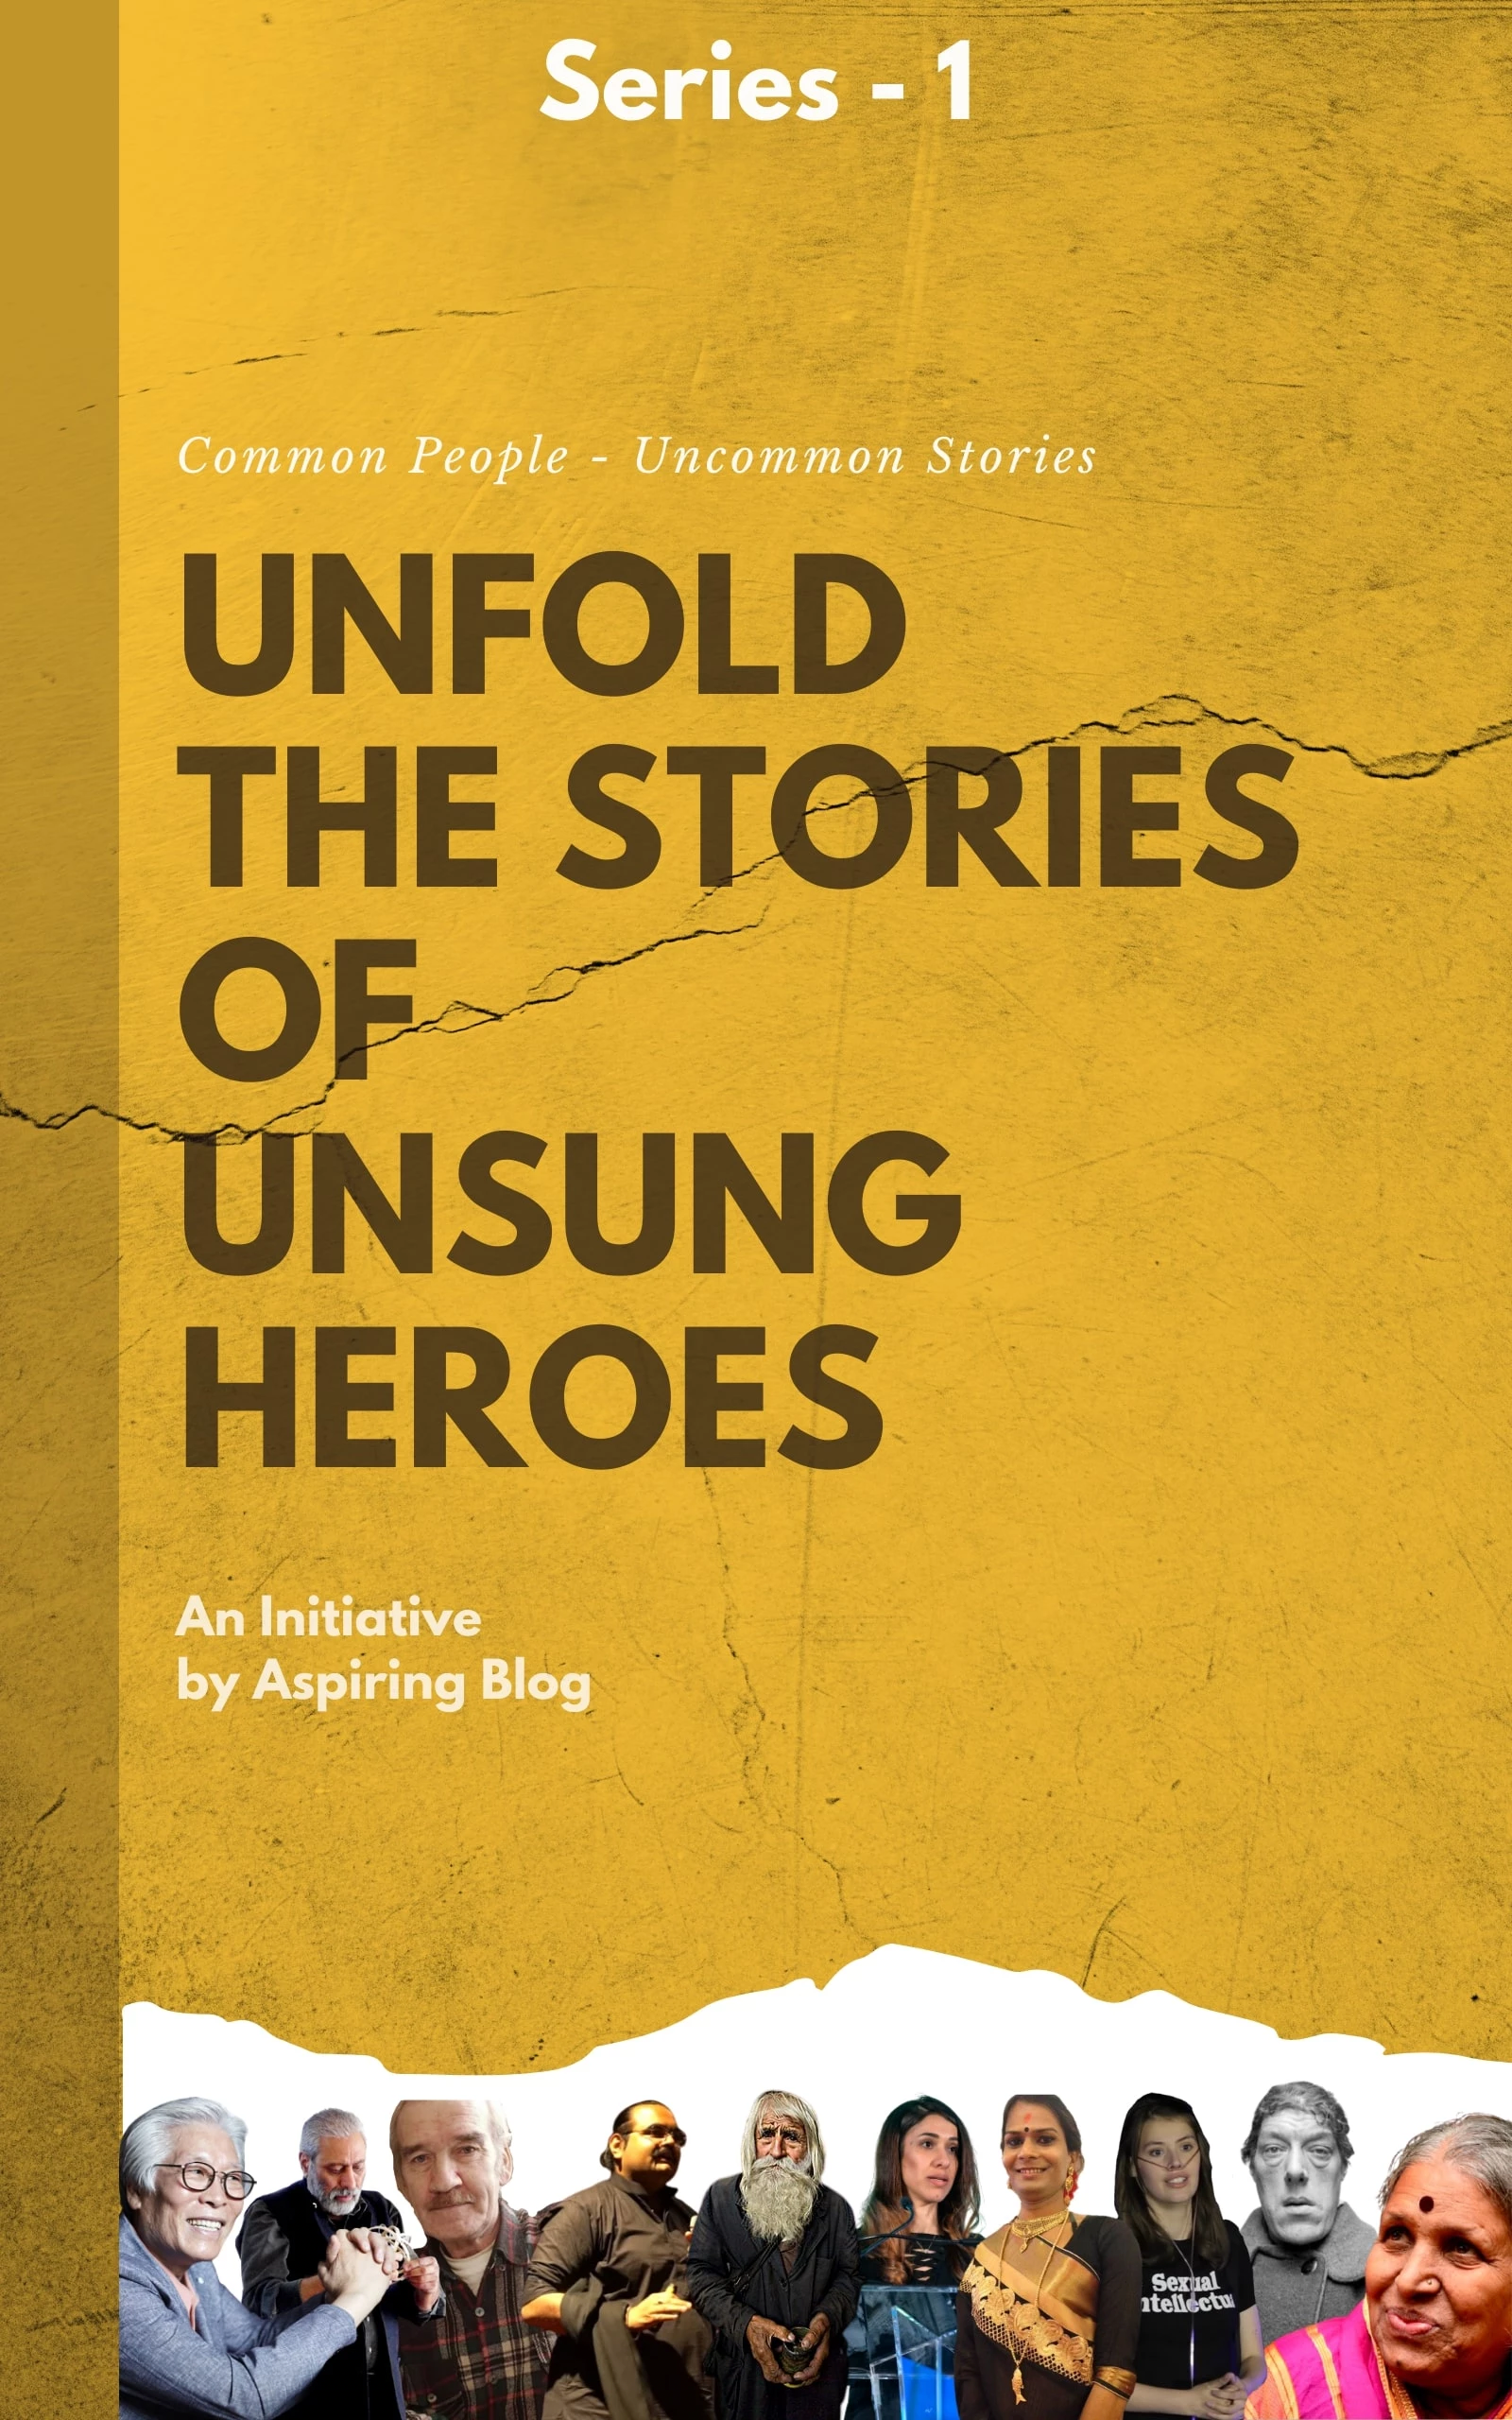 Unfold the Stories of Unsung Heroes (Series -1)